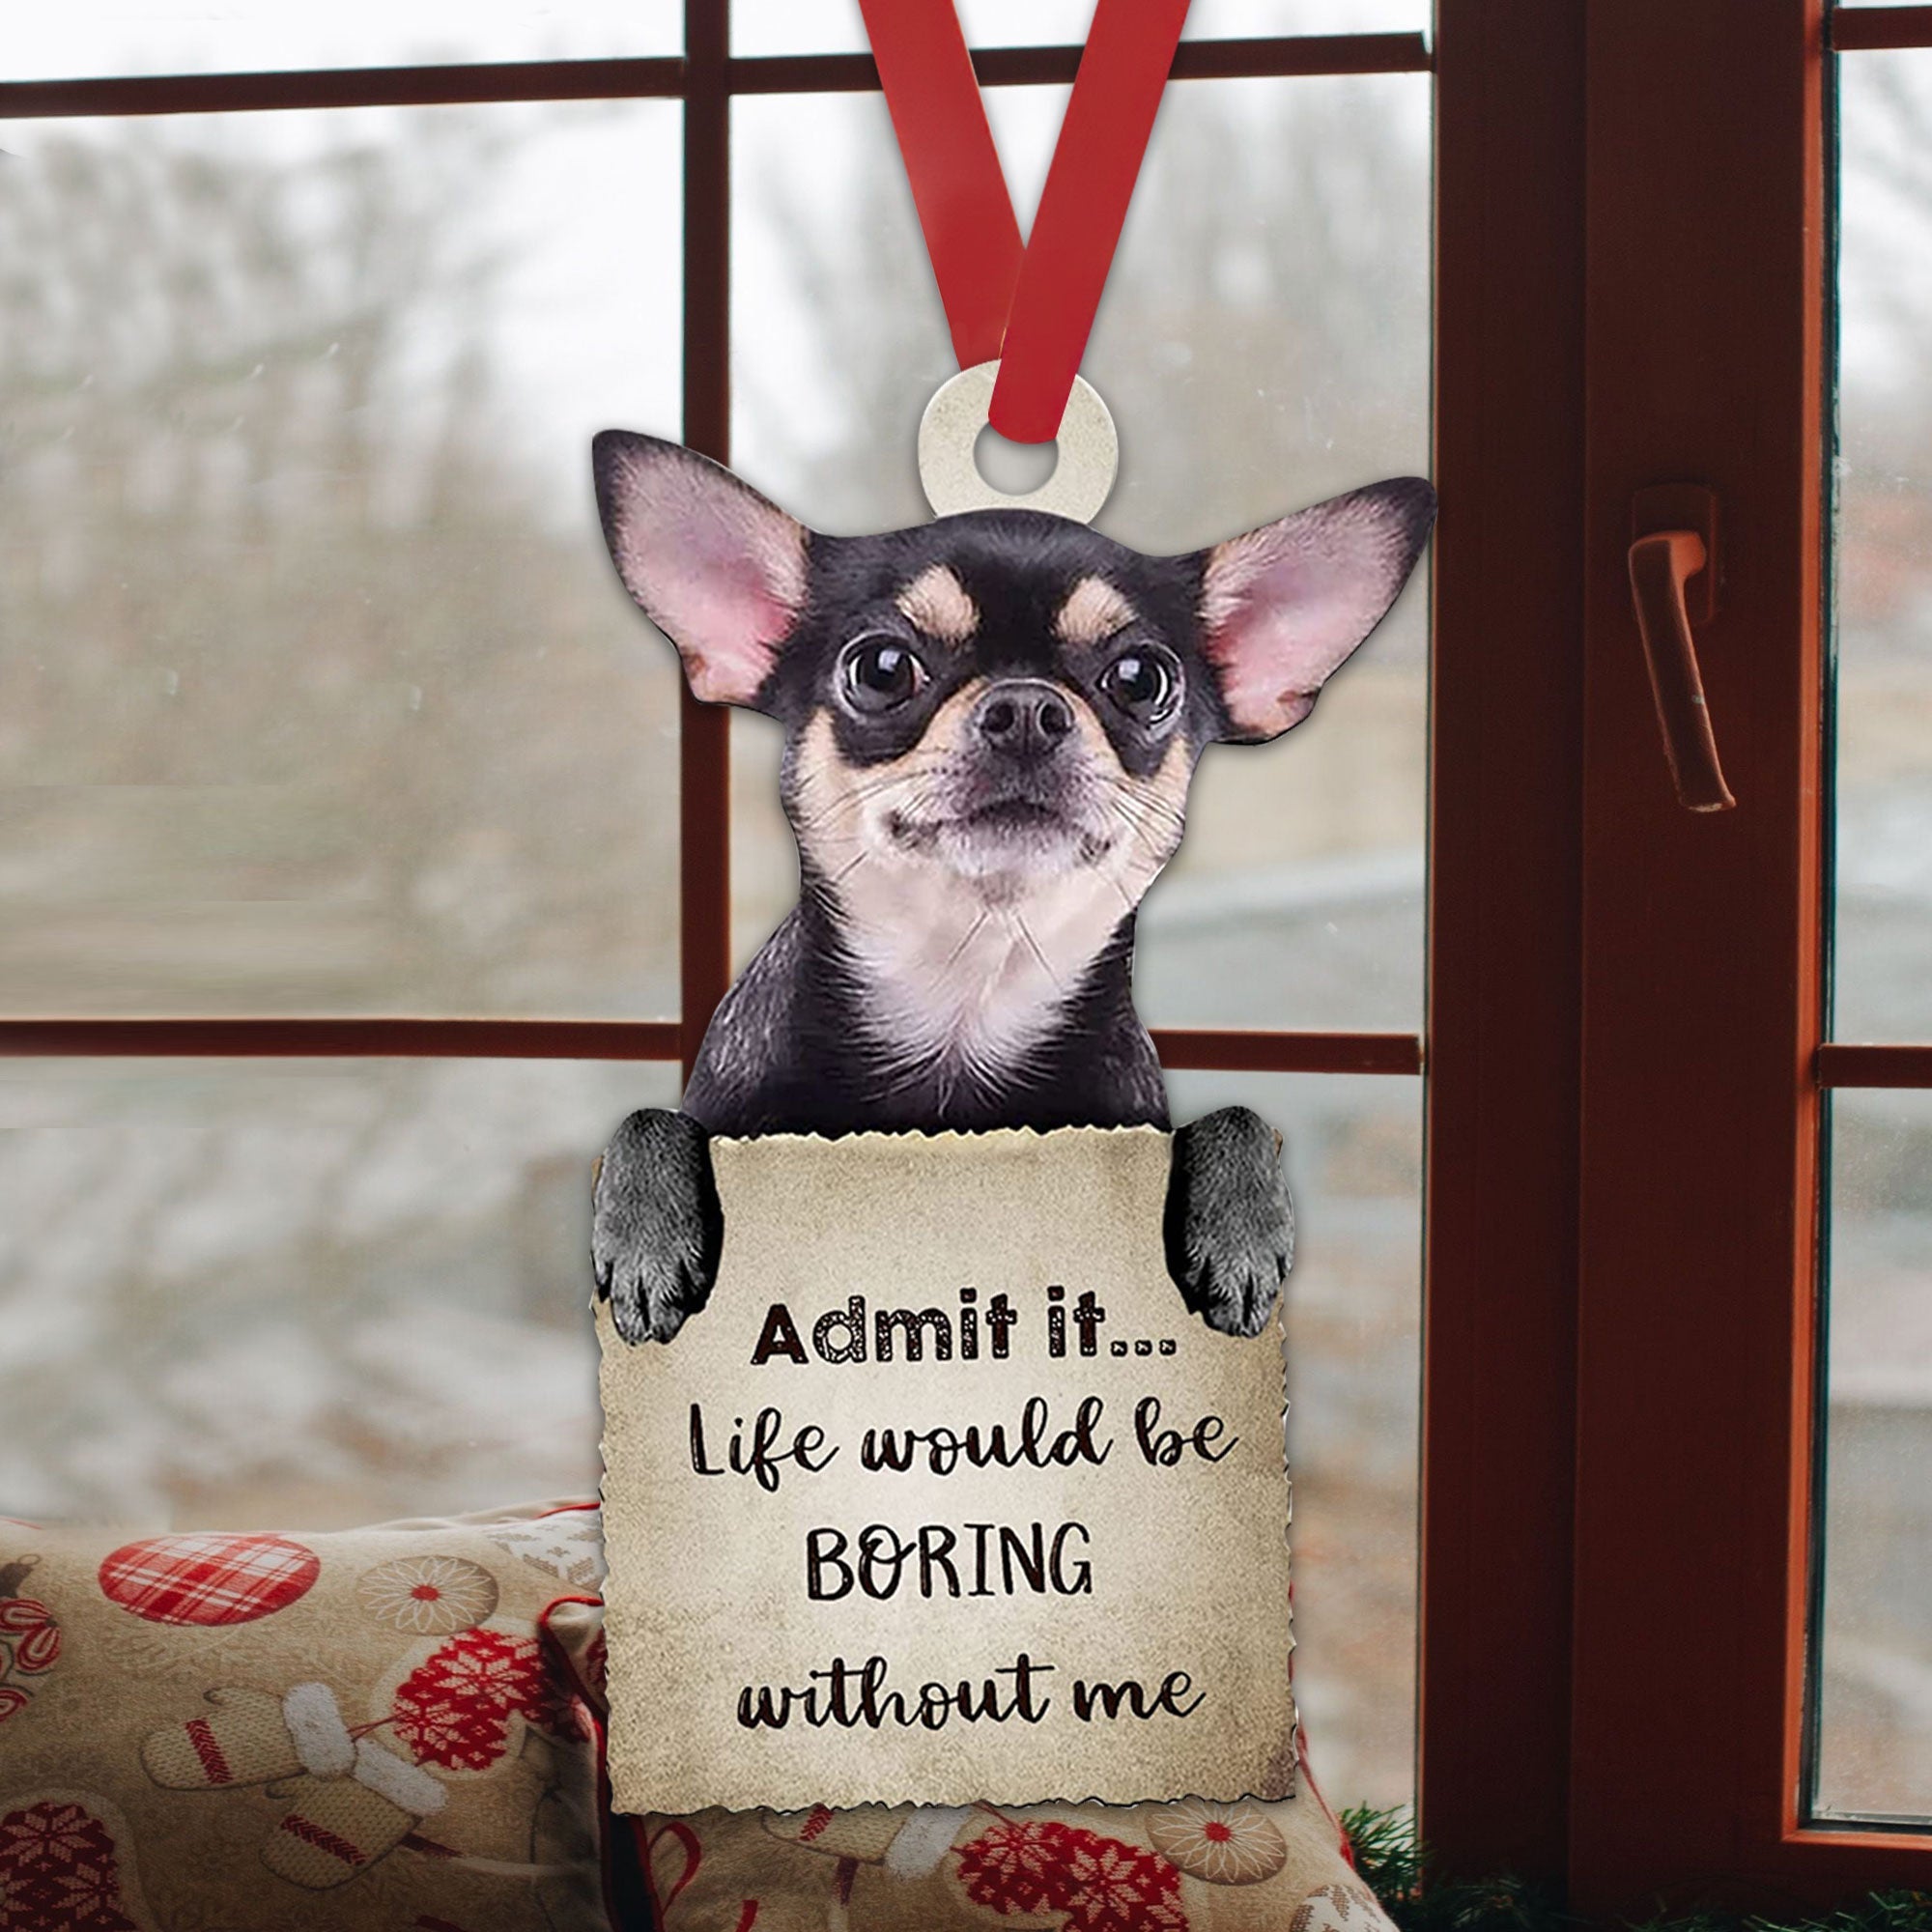 Chihuahua Admit It Life Would Be Boring Without Me Car Ornament